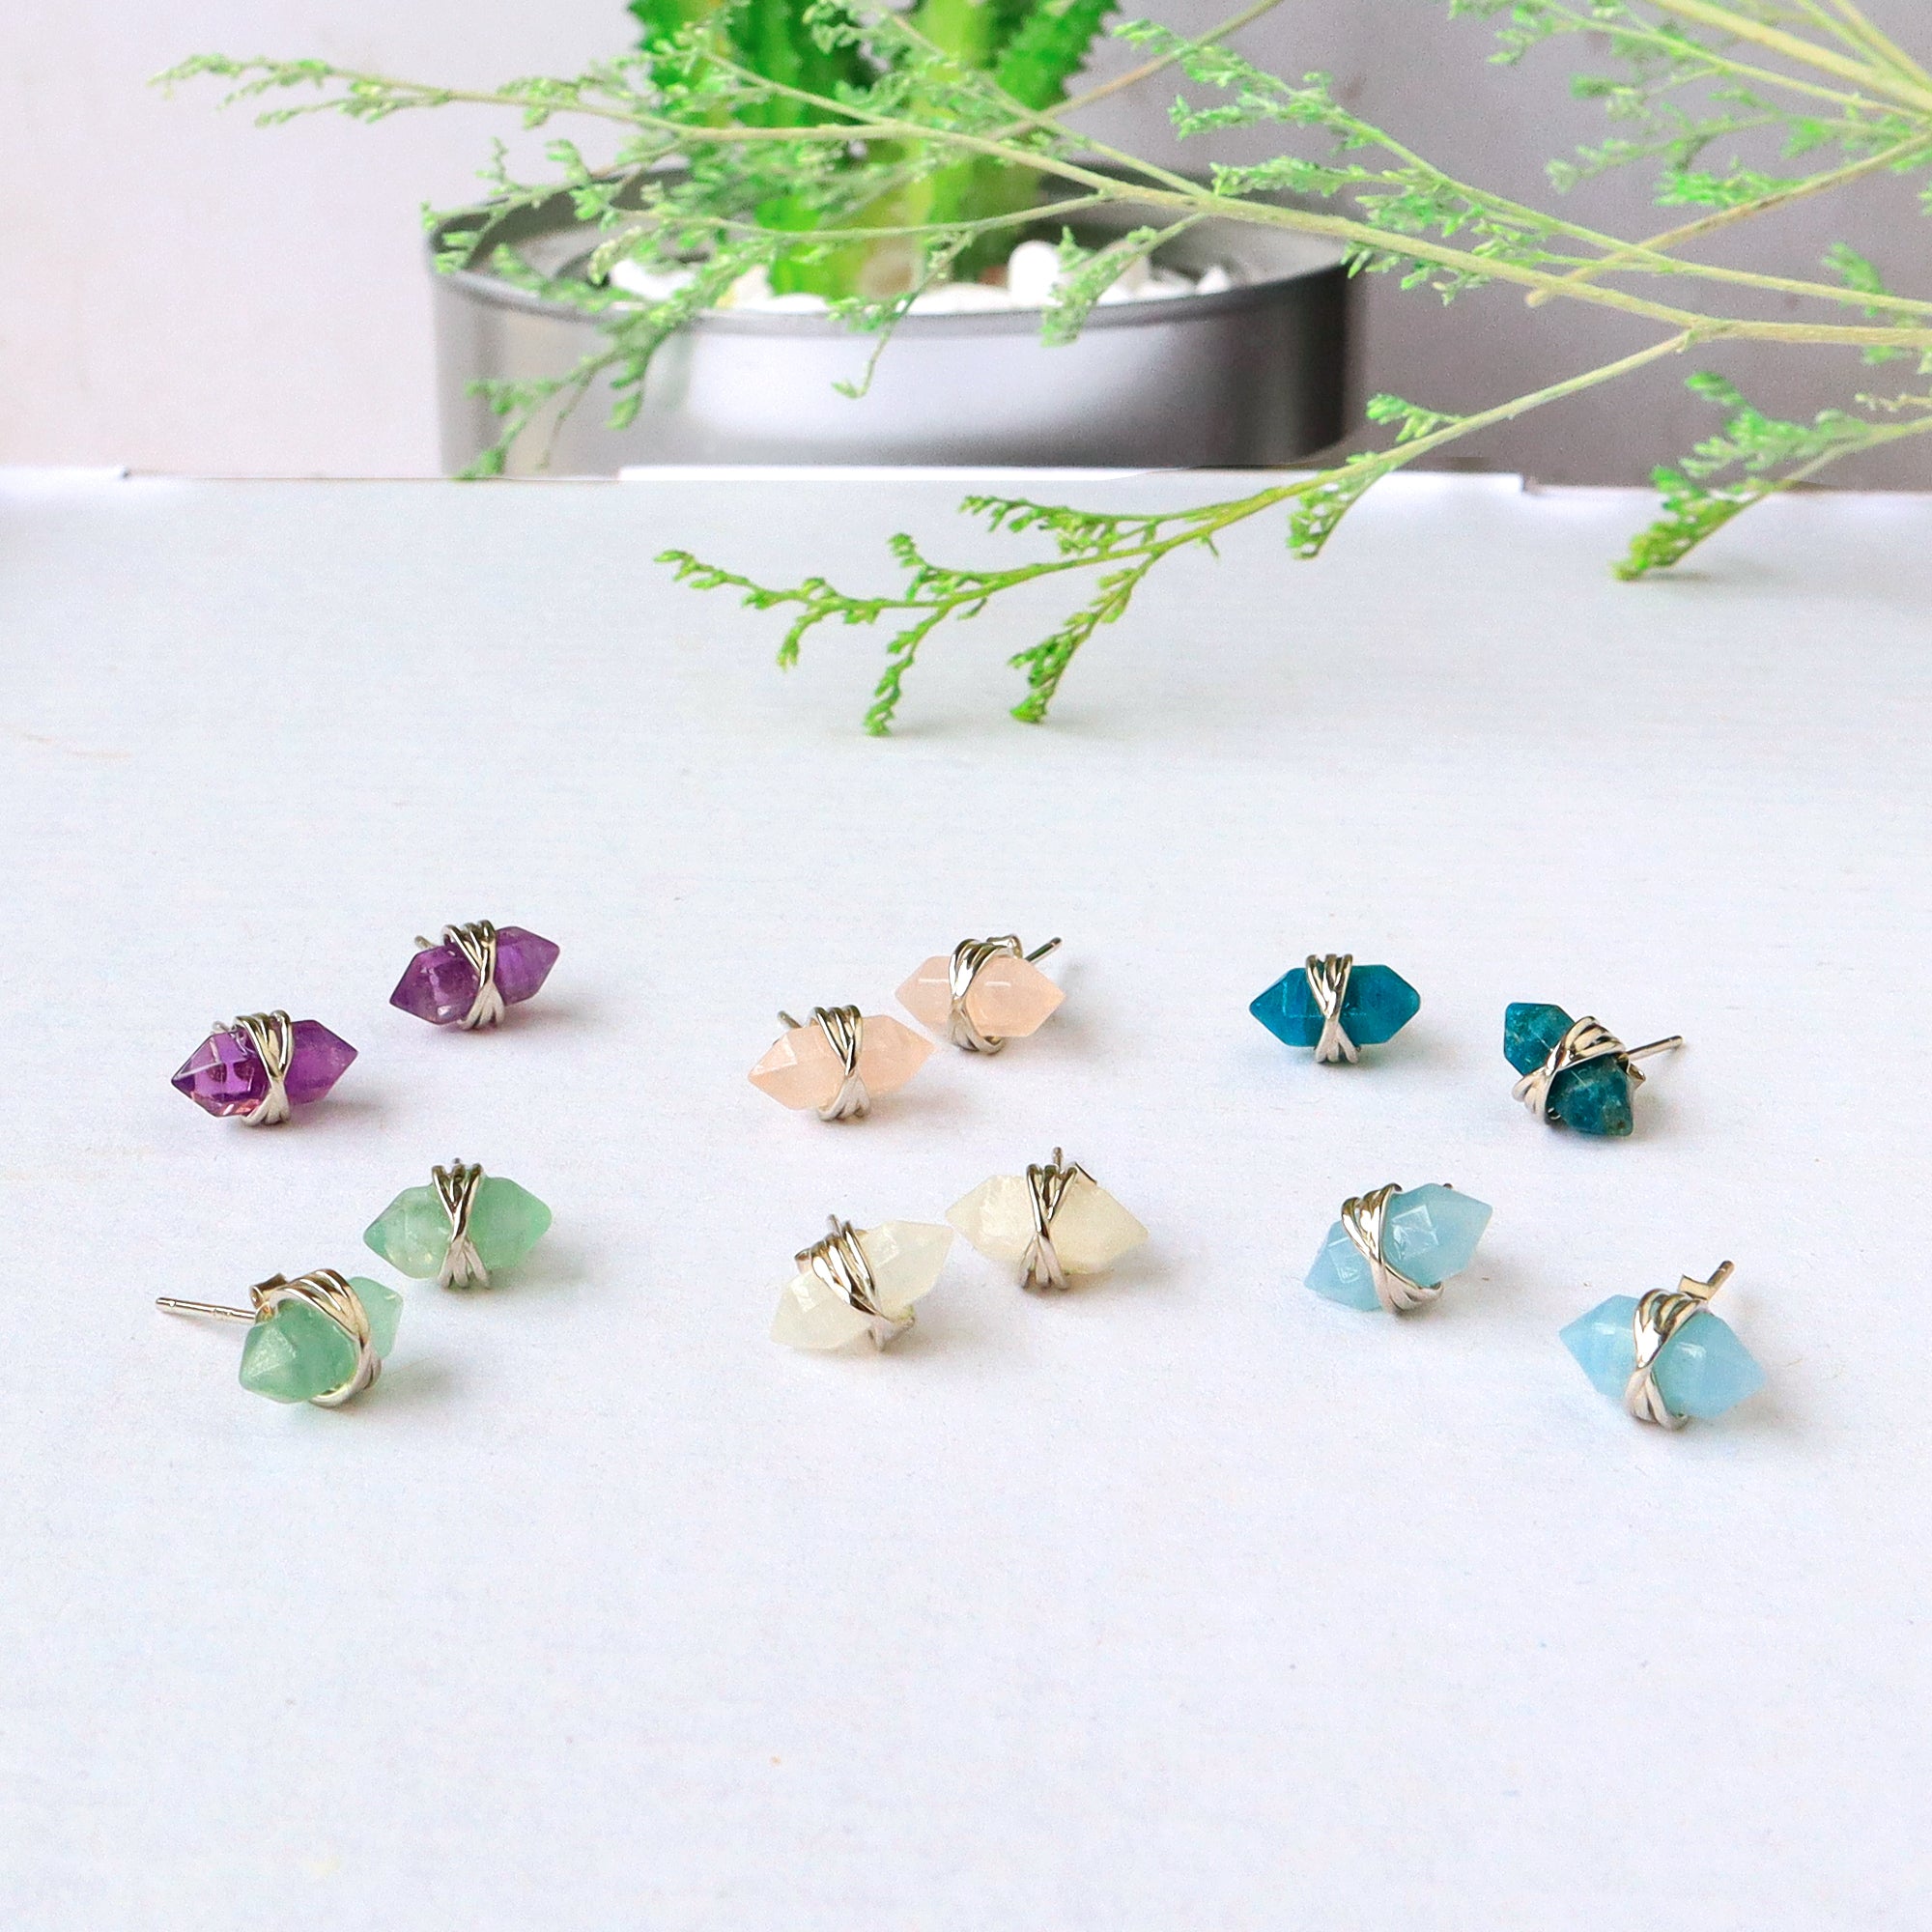 Silver Plated Natural Birthstone Stud Earrings, Tiny Hexagon Point Faceted Gemstone Earrings, Healing Crystal Post Earrings Jewelry BT002